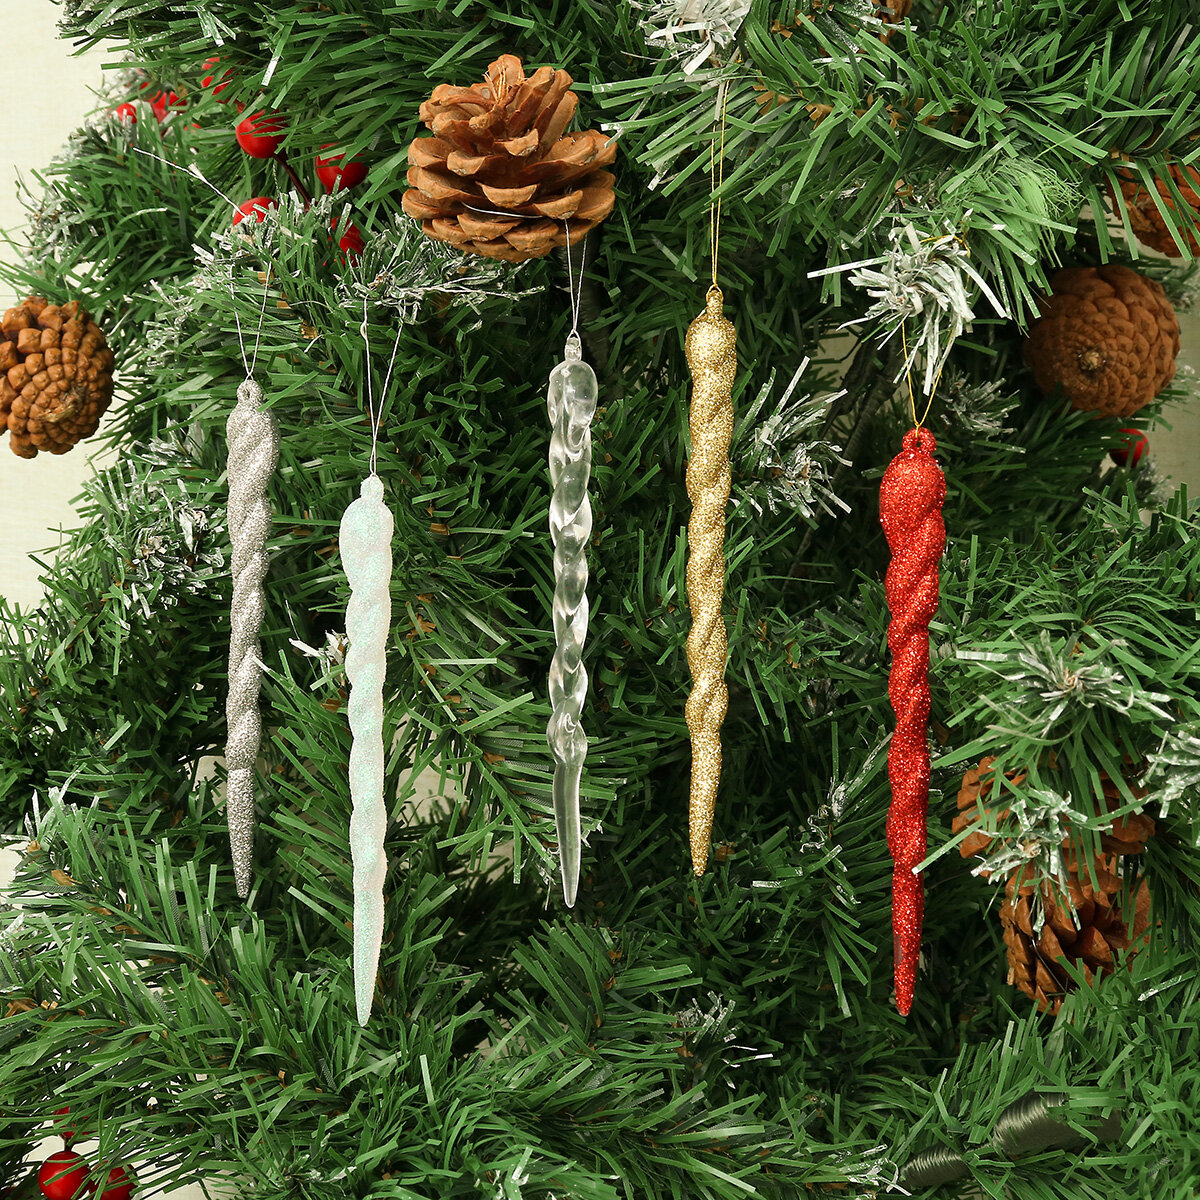 2020 Christmas Tree Ornament Simulation Ice Christmas Tree Hanging Decoration Icicle Prop for DIY New Year Party Xmas Ho